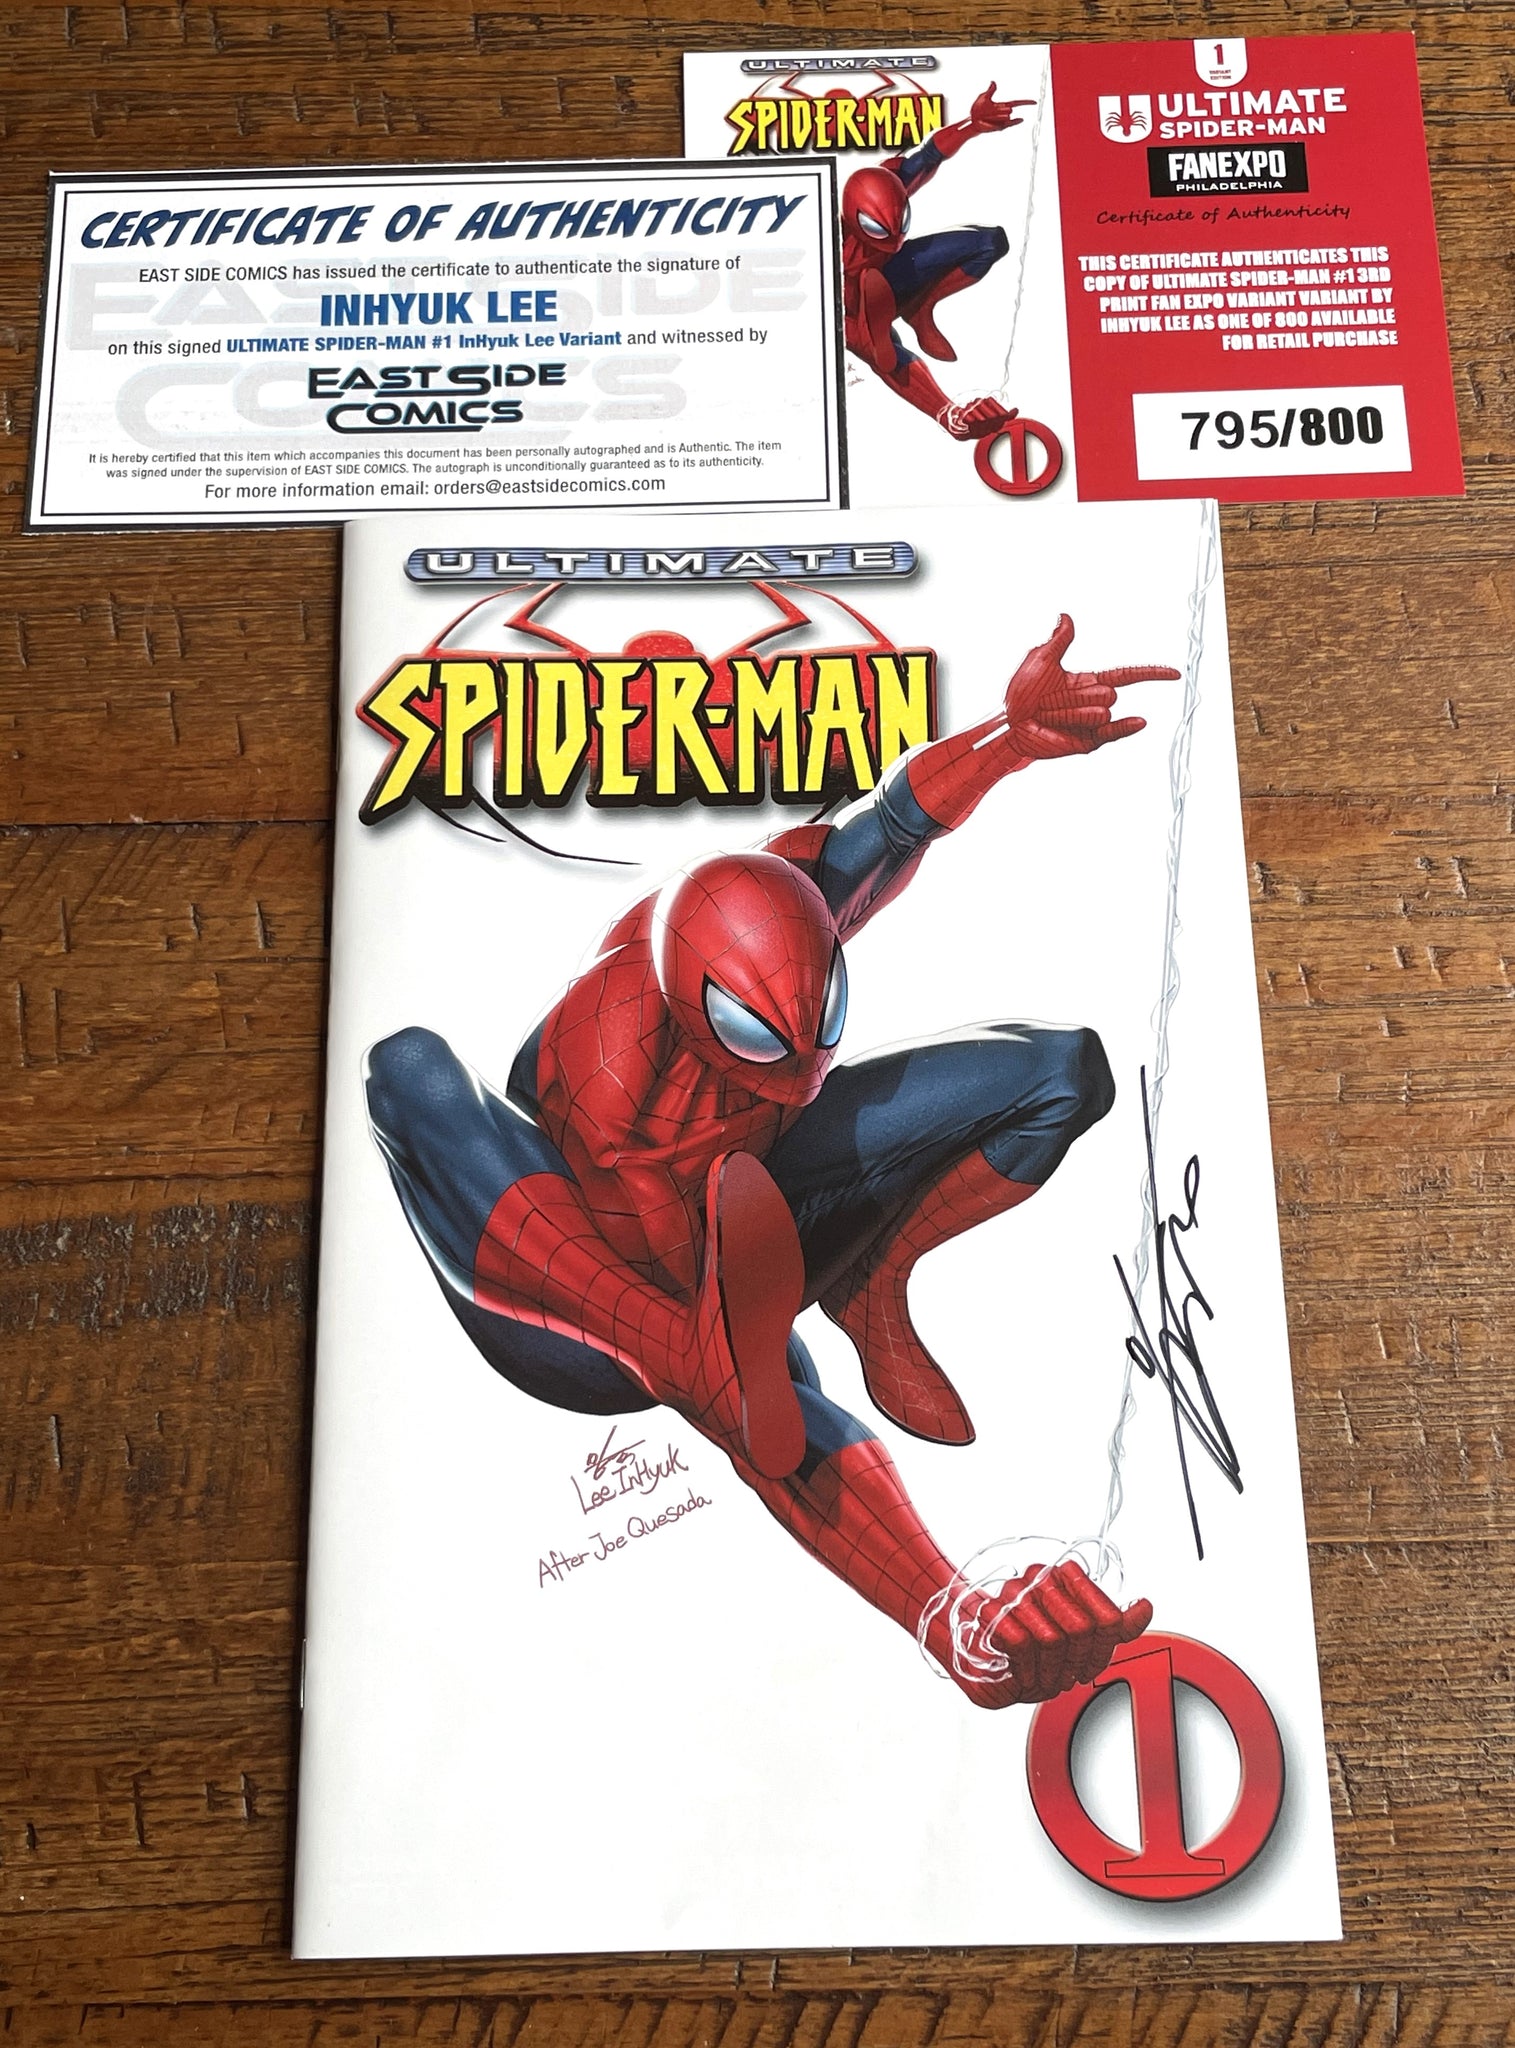 ULTIMATE SPIDER-MAN #1 INHYUK LEE SIGNED FAN EXPO PHILLY WHITE (3rd Print) VARIANT LE TO 800